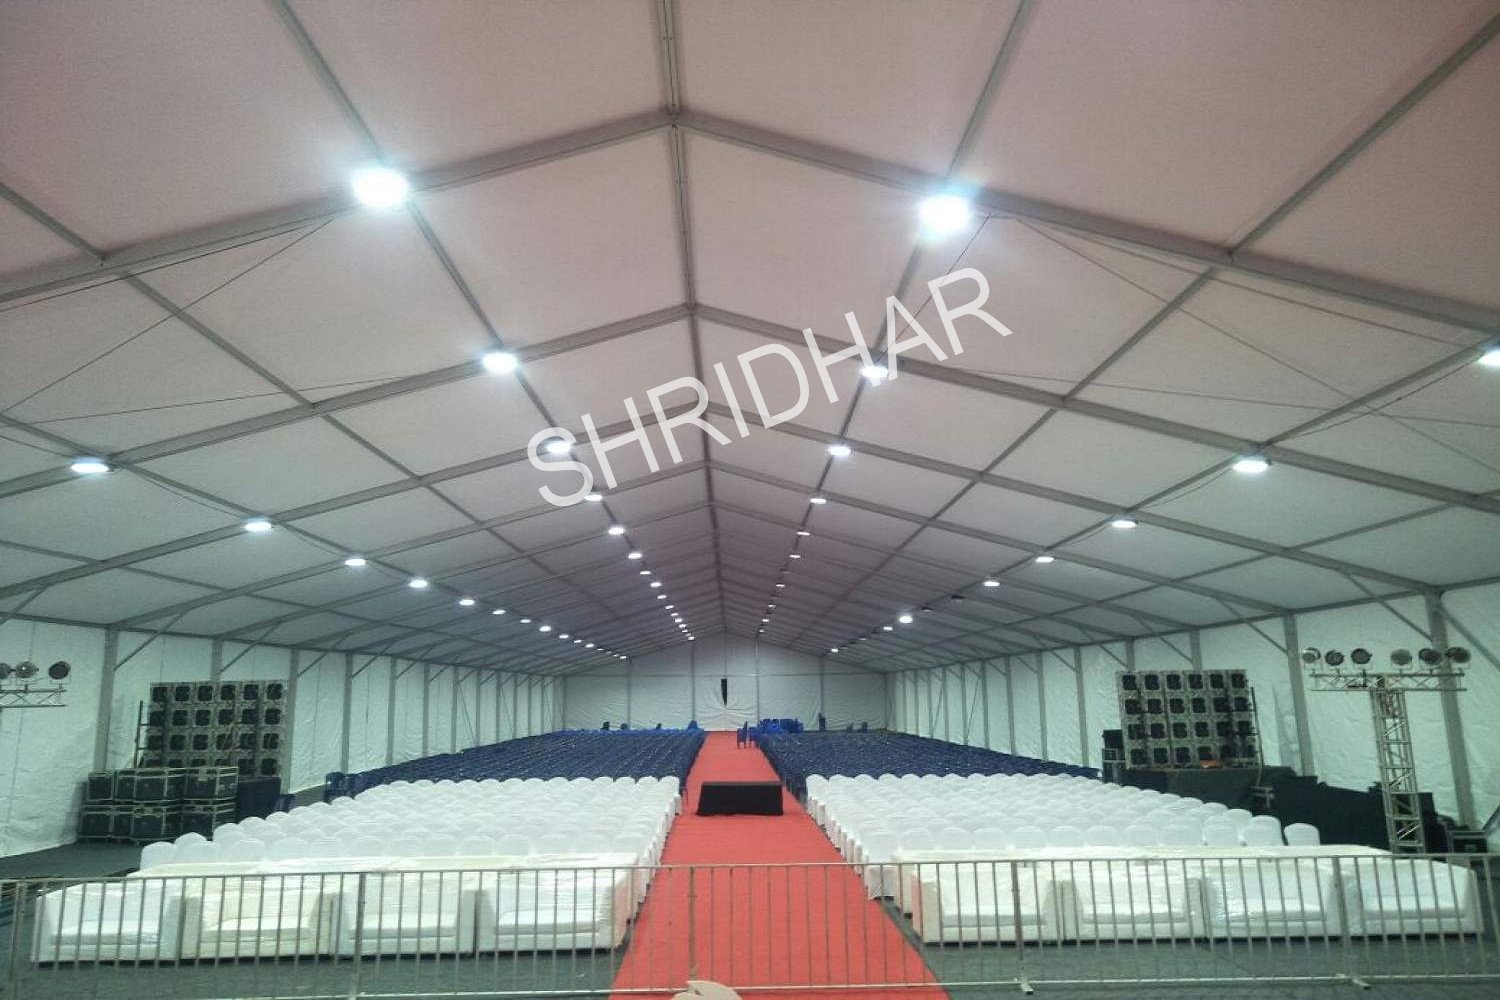 waterproof sheds industrial sheds for rent for hire in bangalore shridhar tent house